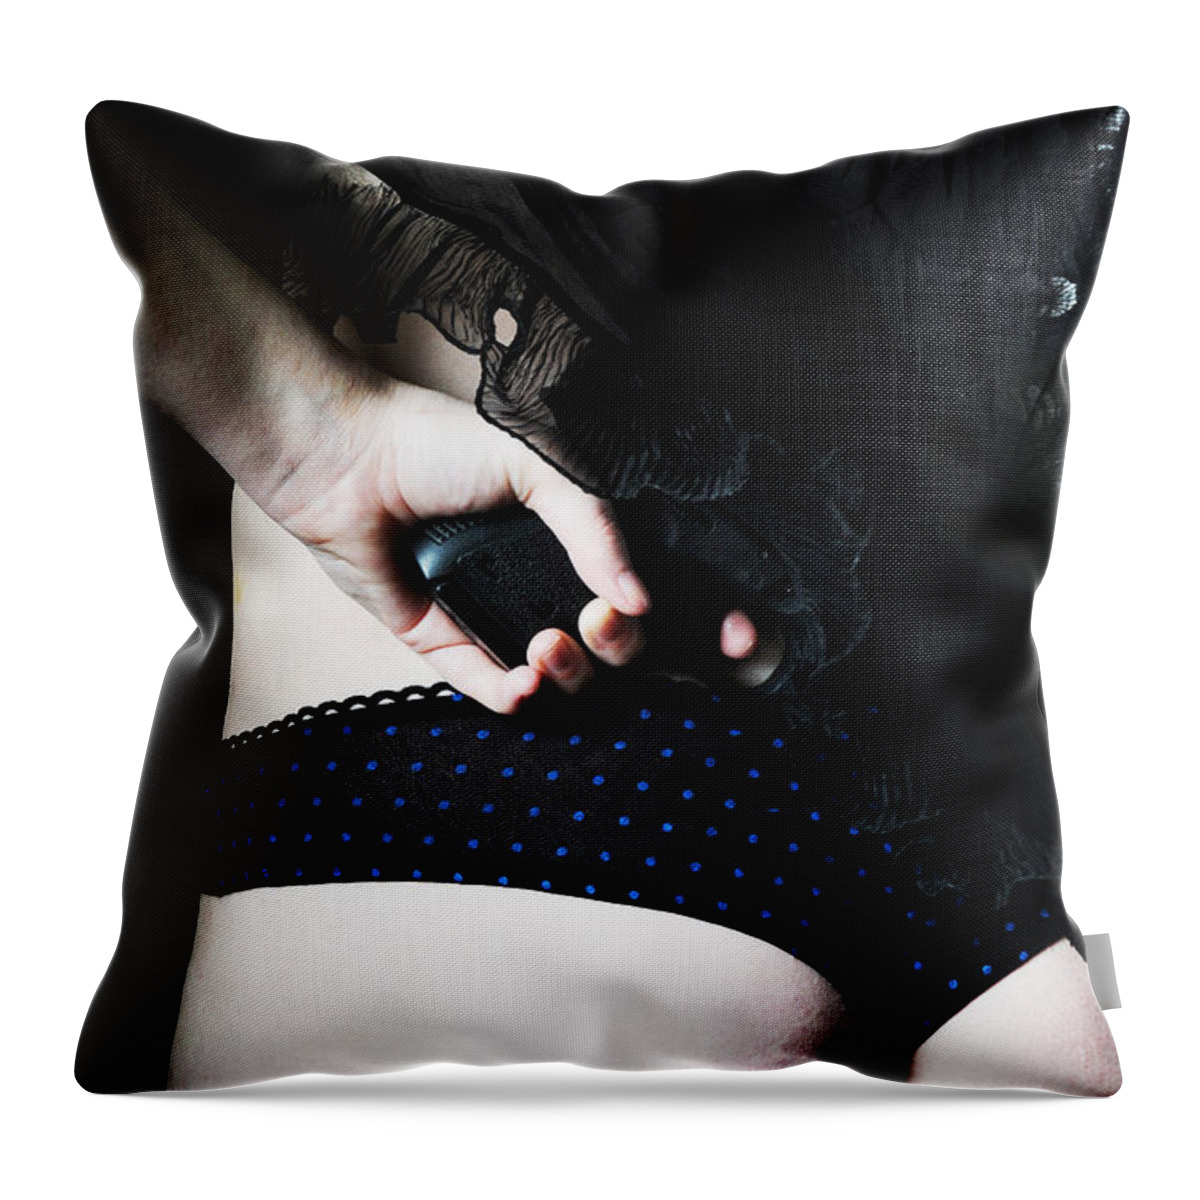 Artistic Throw Pillow featuring the photograph Polka dots and Pistols by Robert WK Clark